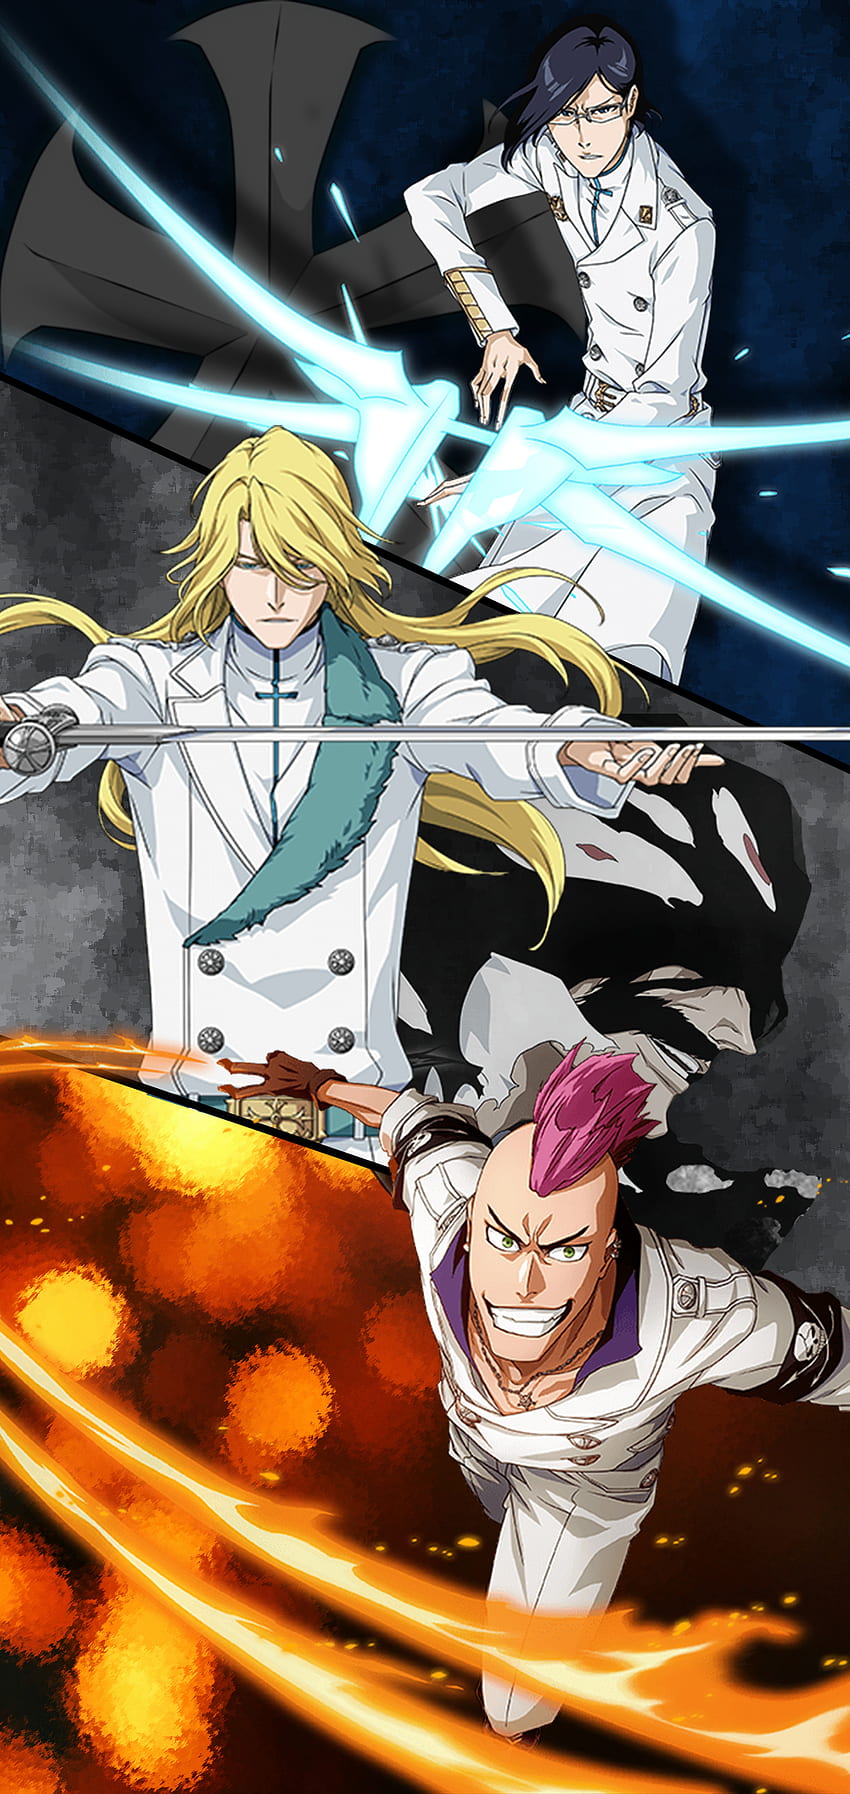 19:9 I Did For My Phone. Turned Out Ok I Think. : R BleachBraveSouls, Brave Phone HD phone wallpaper